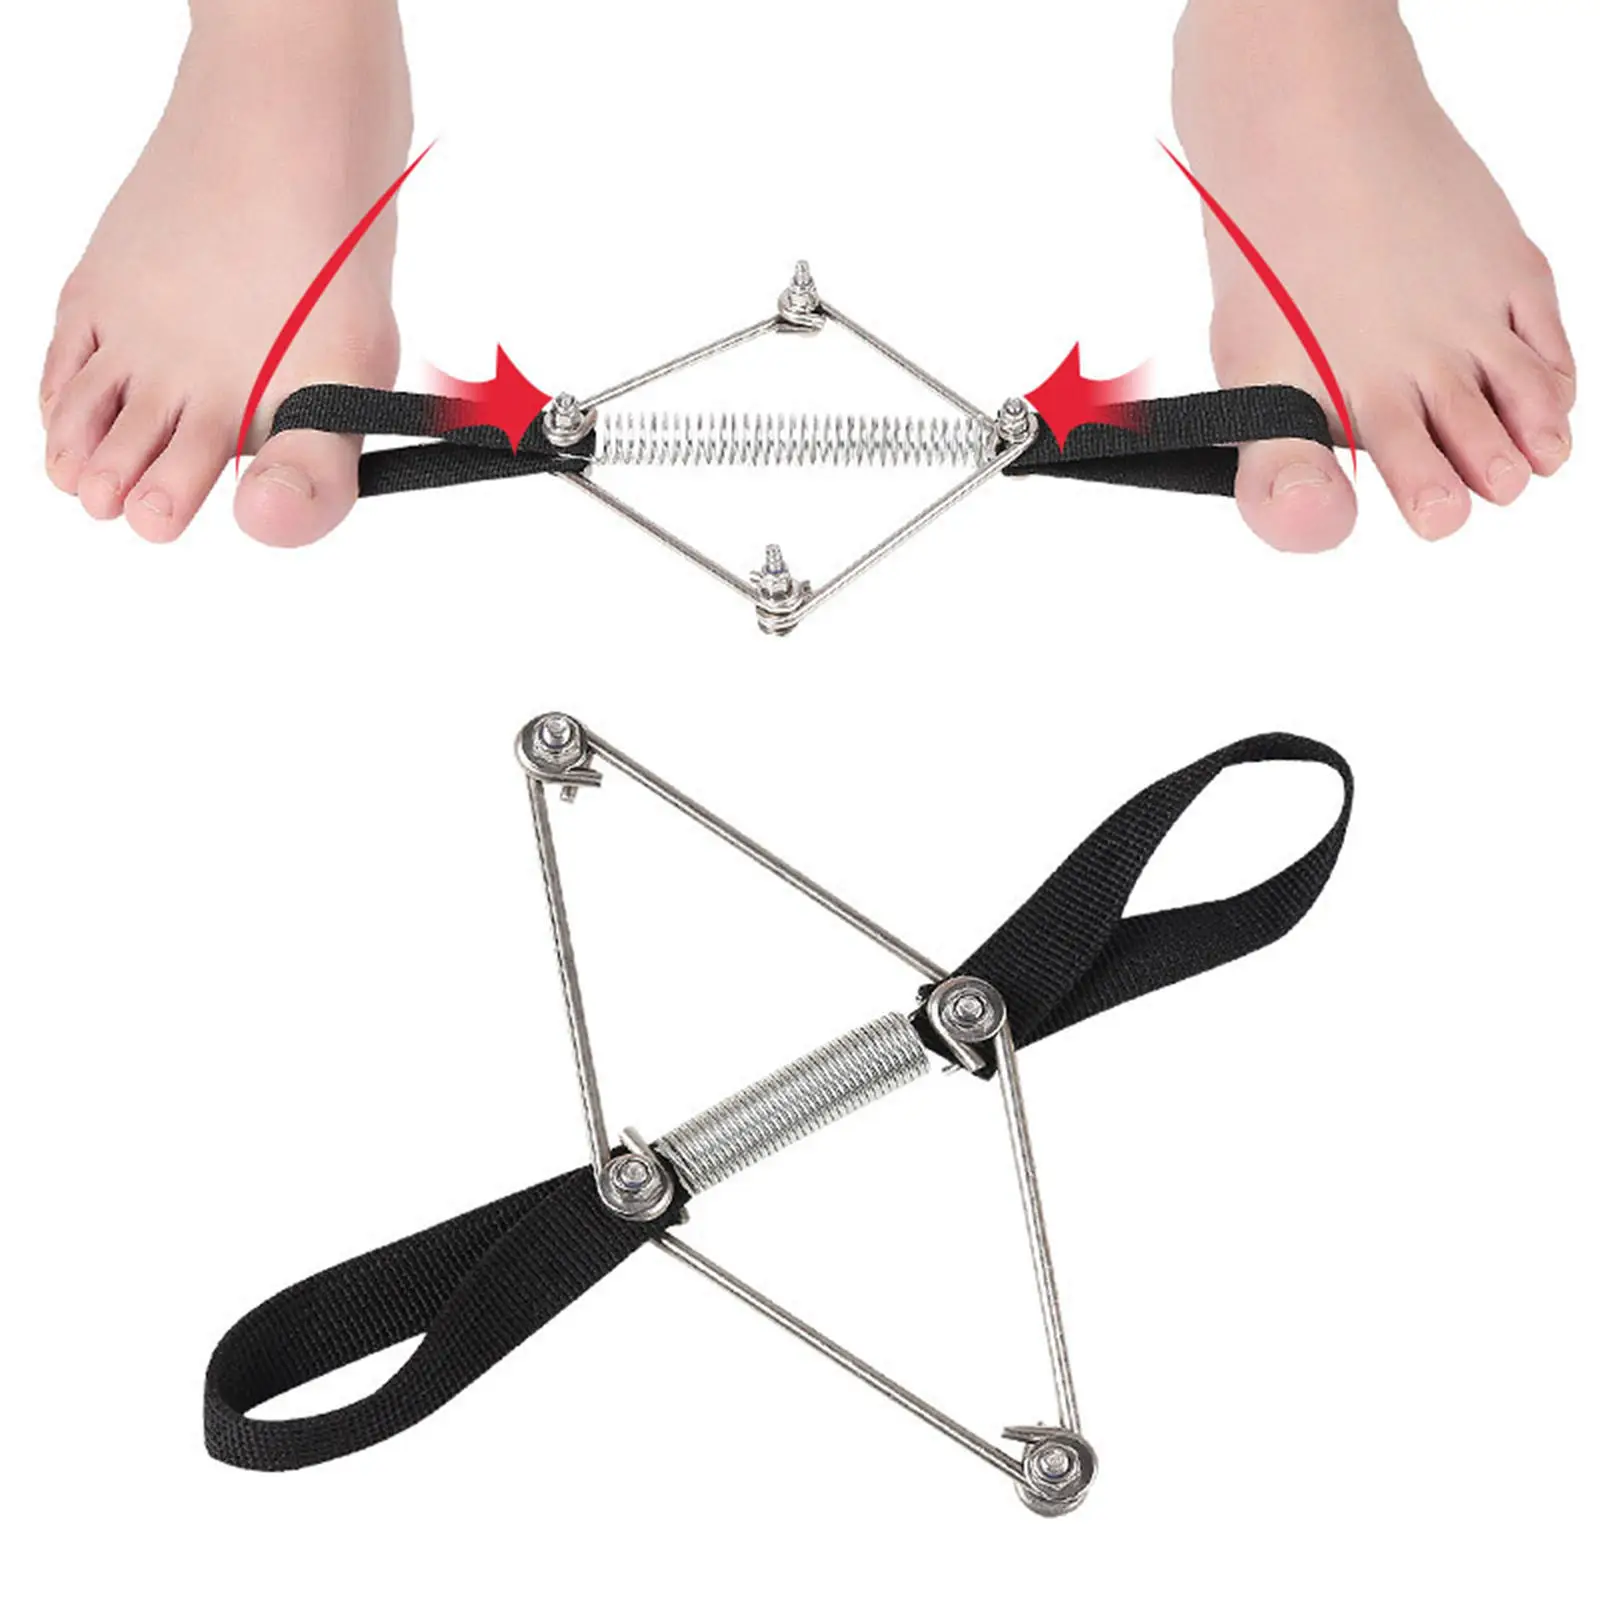 Bunion Corrector Nylon Steel Elastic Toe Exerciser Toe Stretcher for Hammer Toes Big Toe Joint Toe Alignment Foot Care